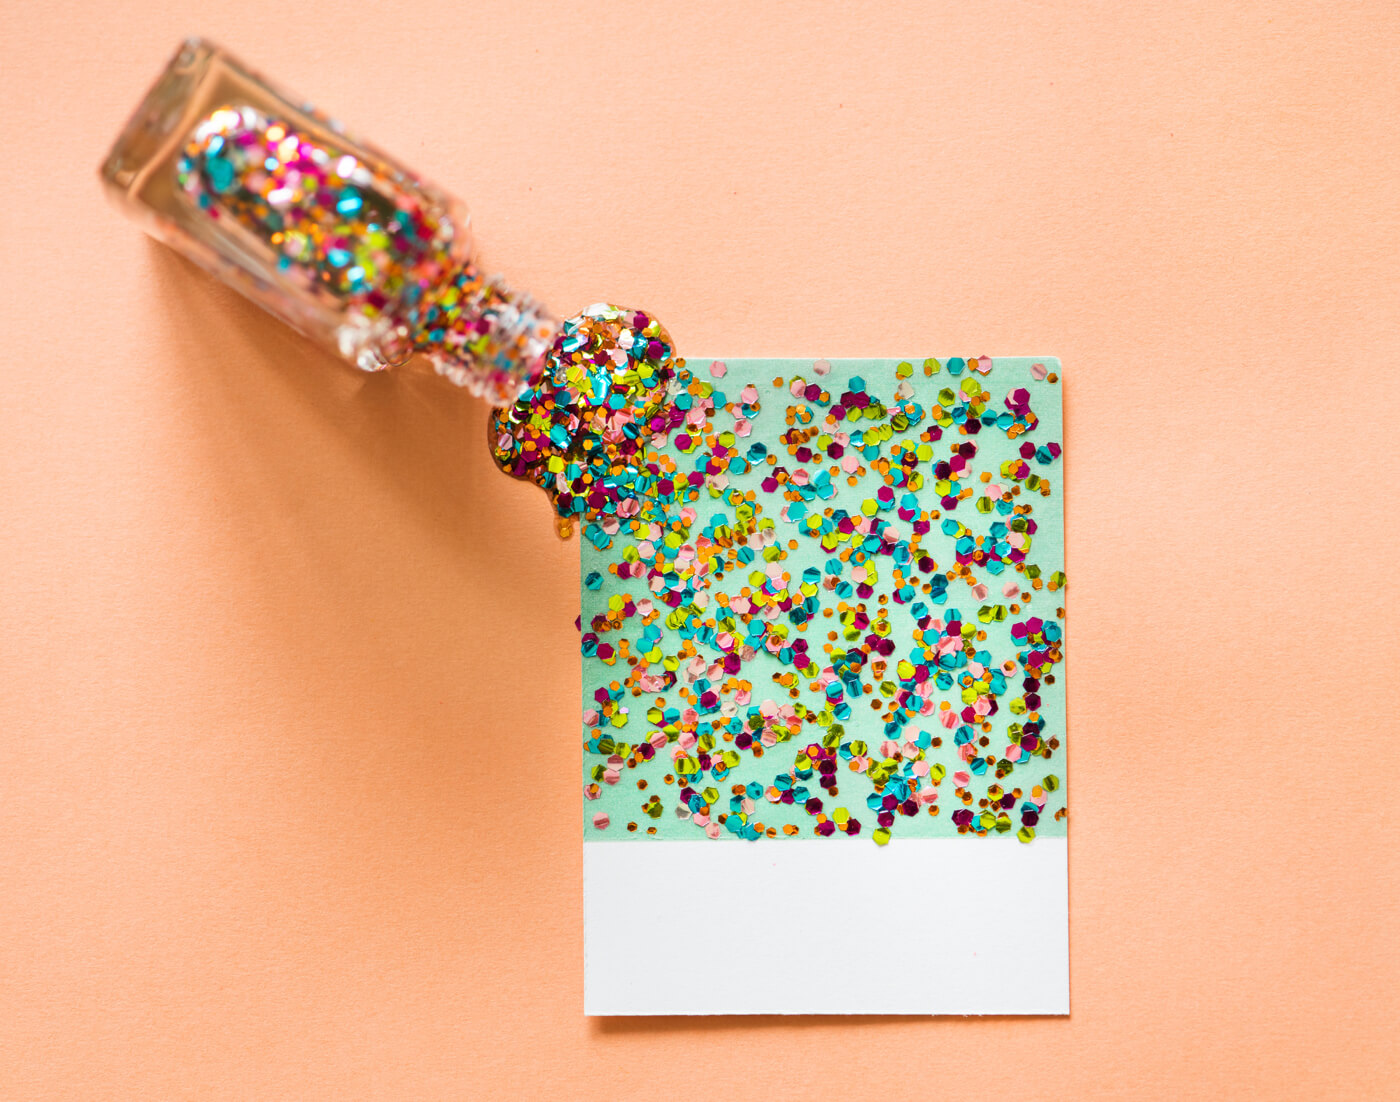 a bottle with seom confetti falling out of it